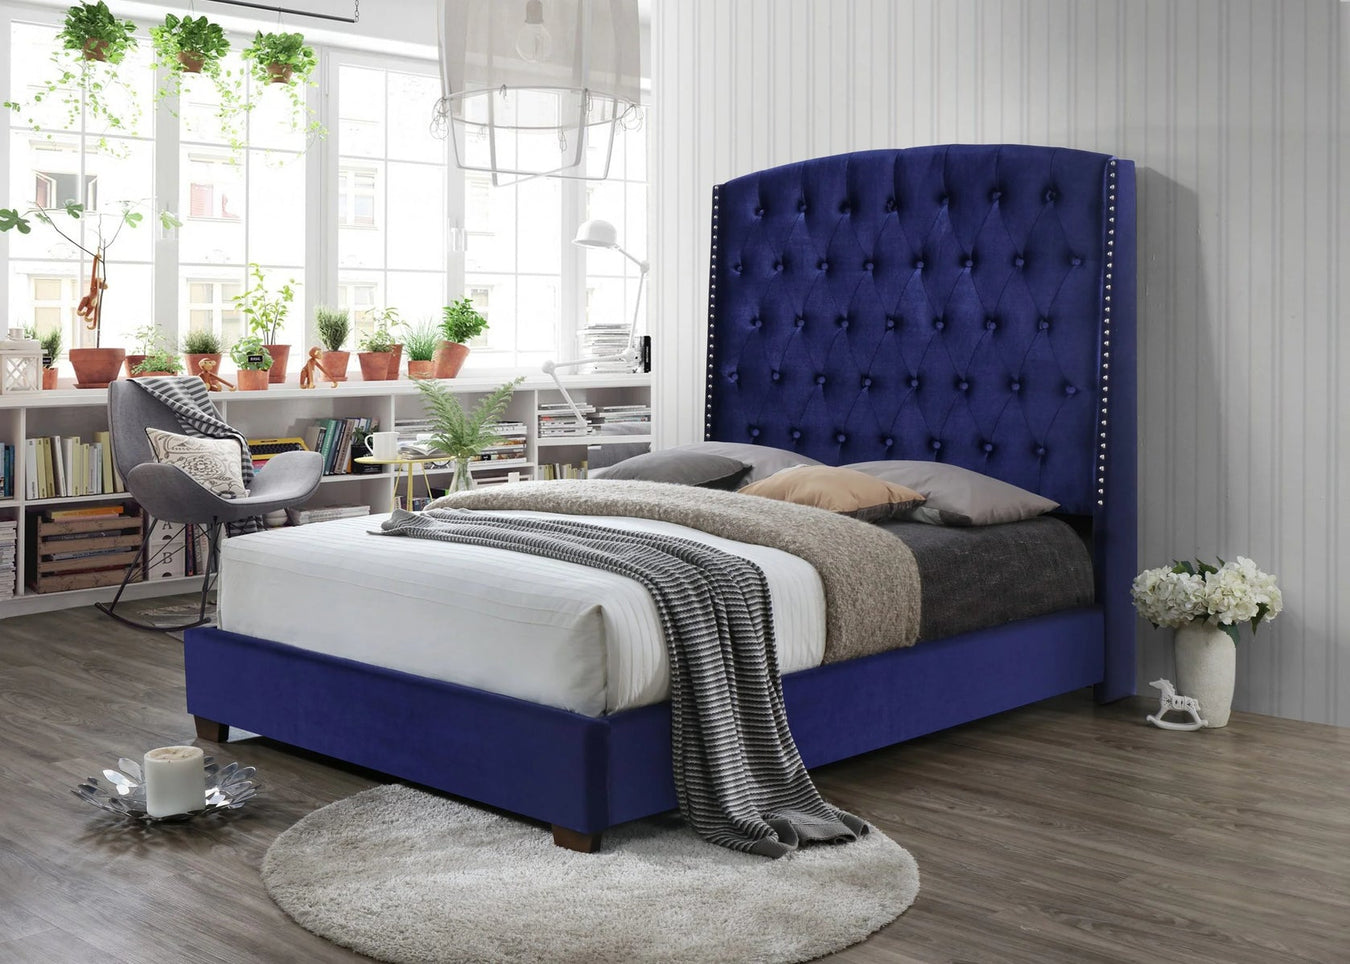 3 Color Options! Renee Upholstered Bed Choose your size!